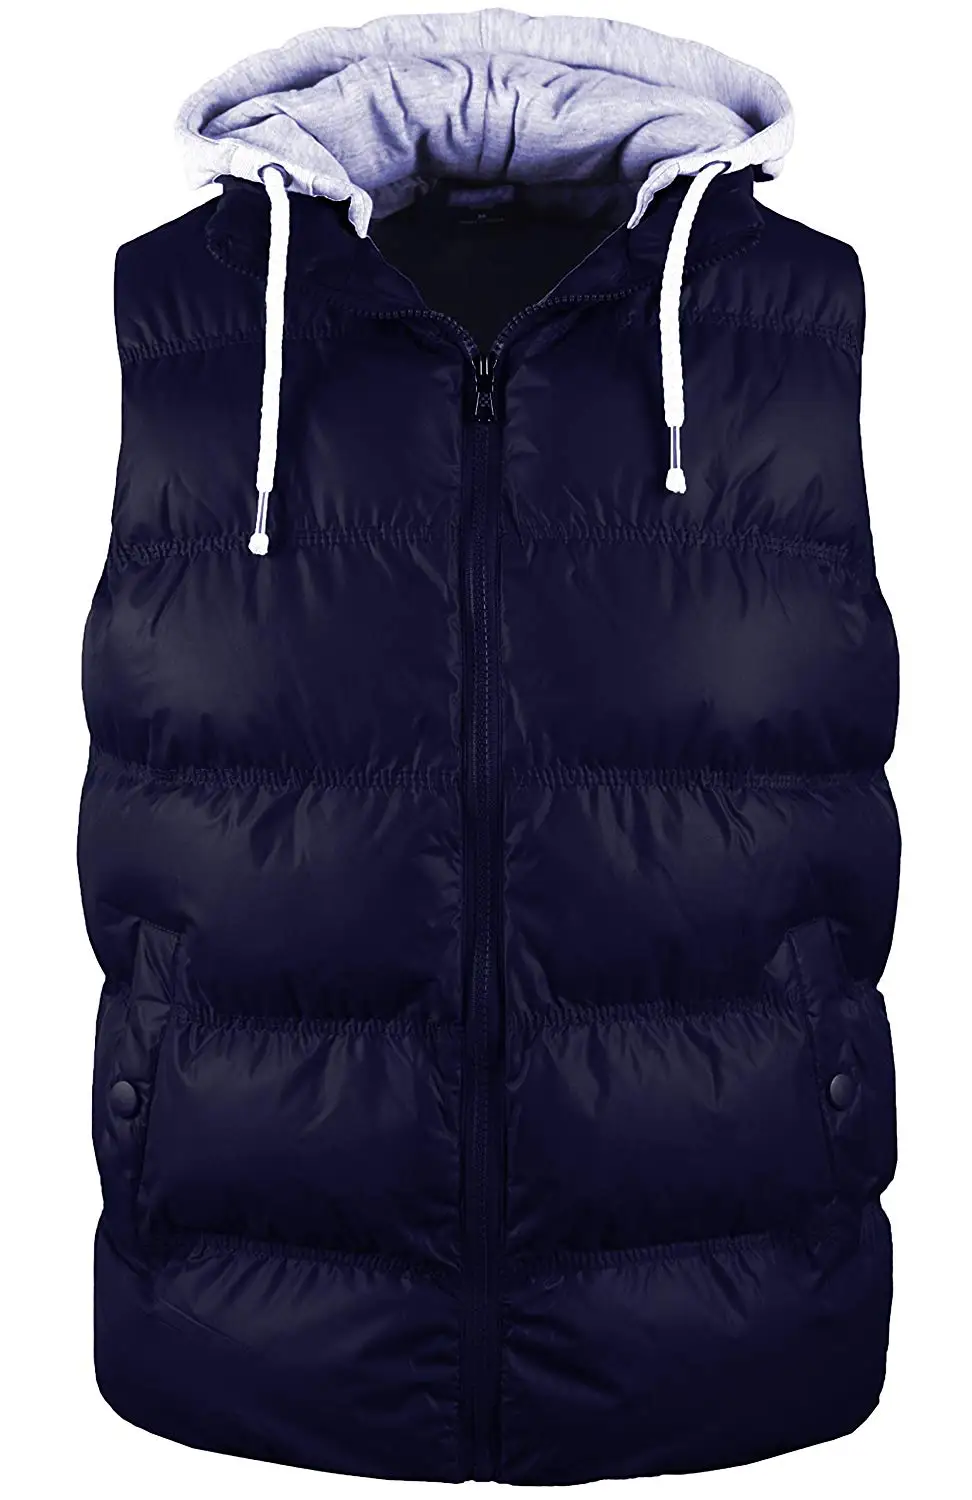 Cheap Hooded Puffer Vest, find Hooded Puffer Vest deals on line at ...